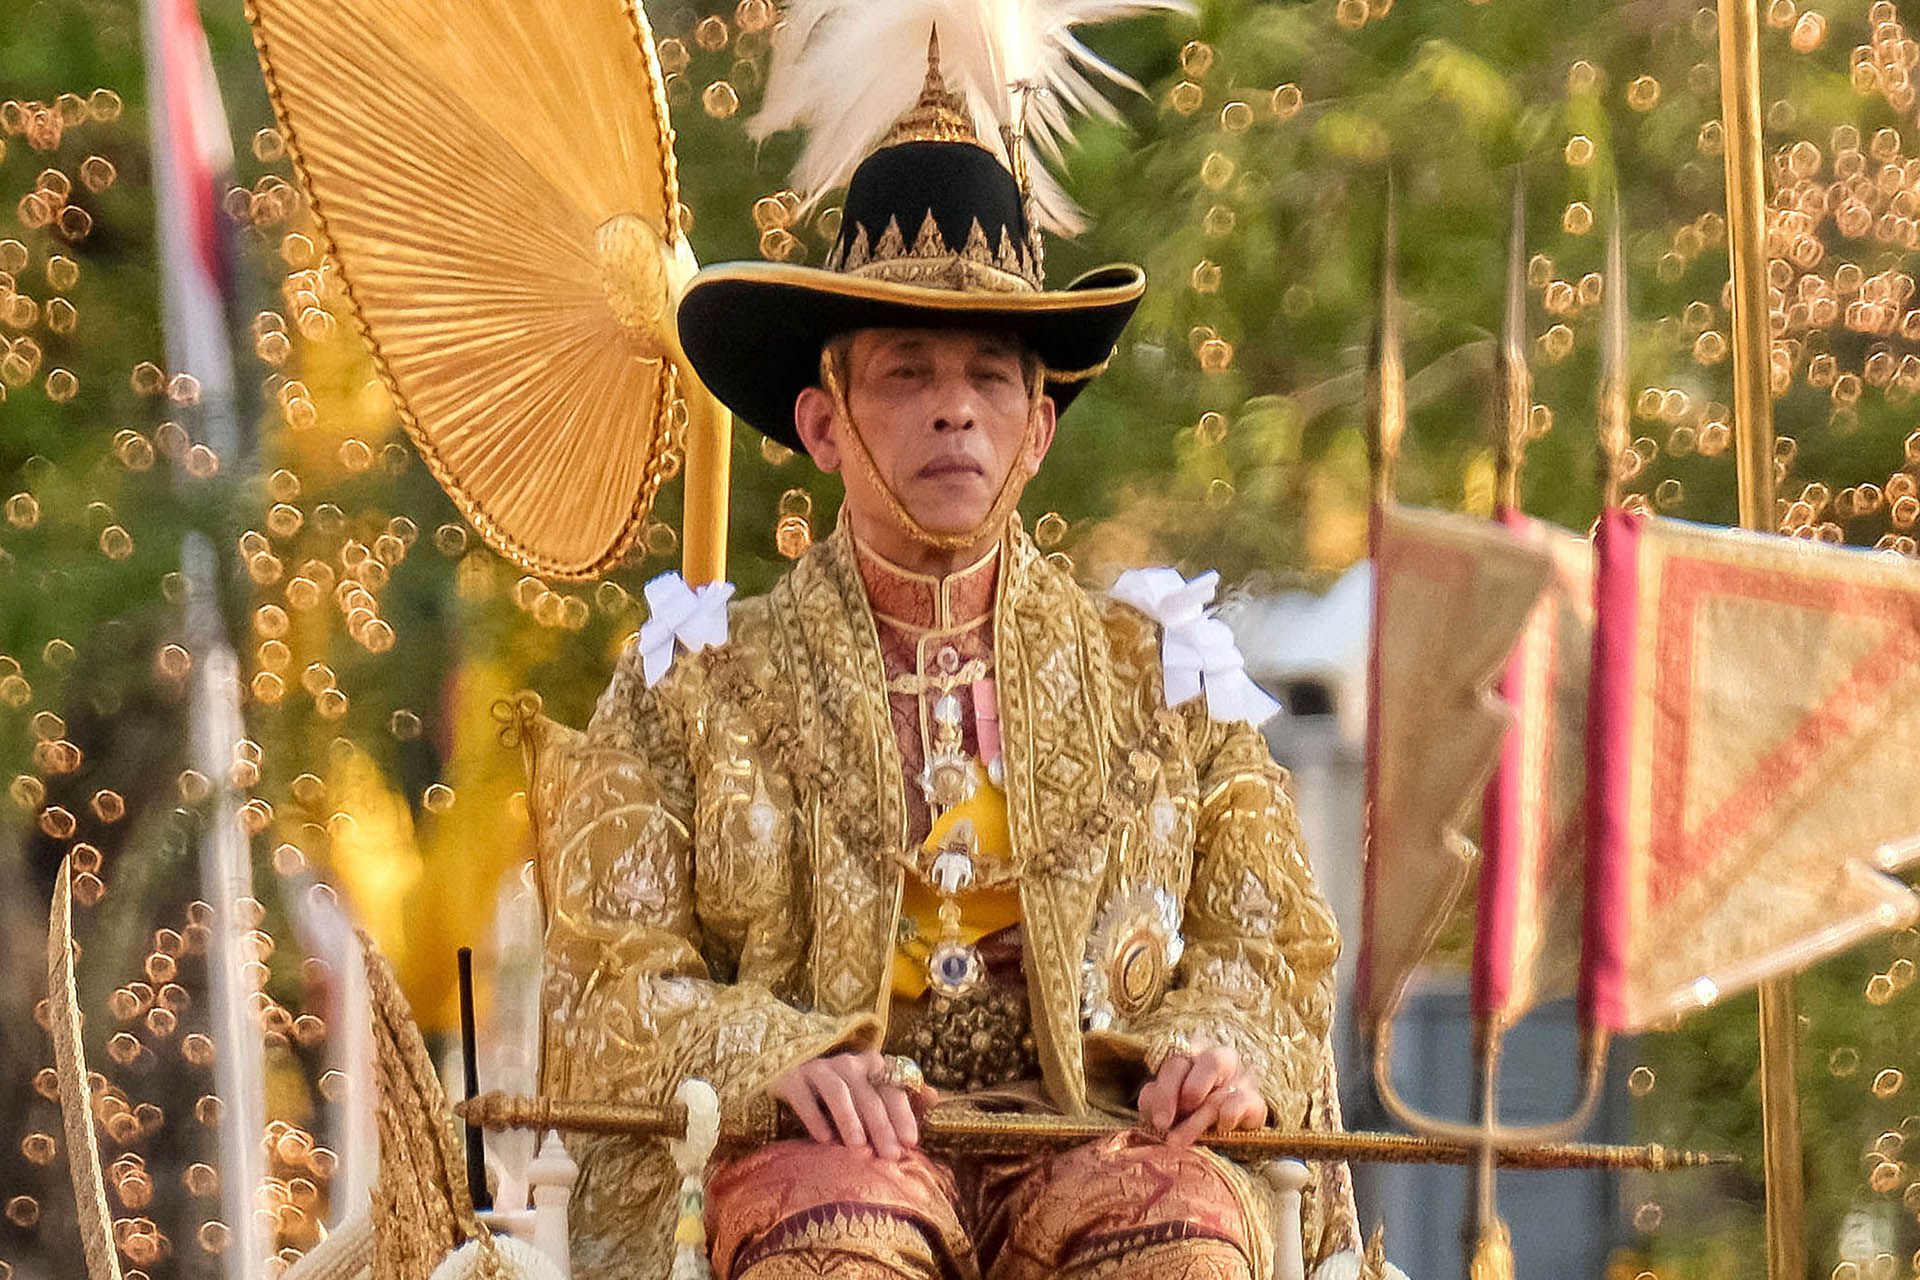 The decision on a death sentence for Daniel Sancho would be in the hands of Thai King Rama X. (Photo by Linh Pham/Getty Images)